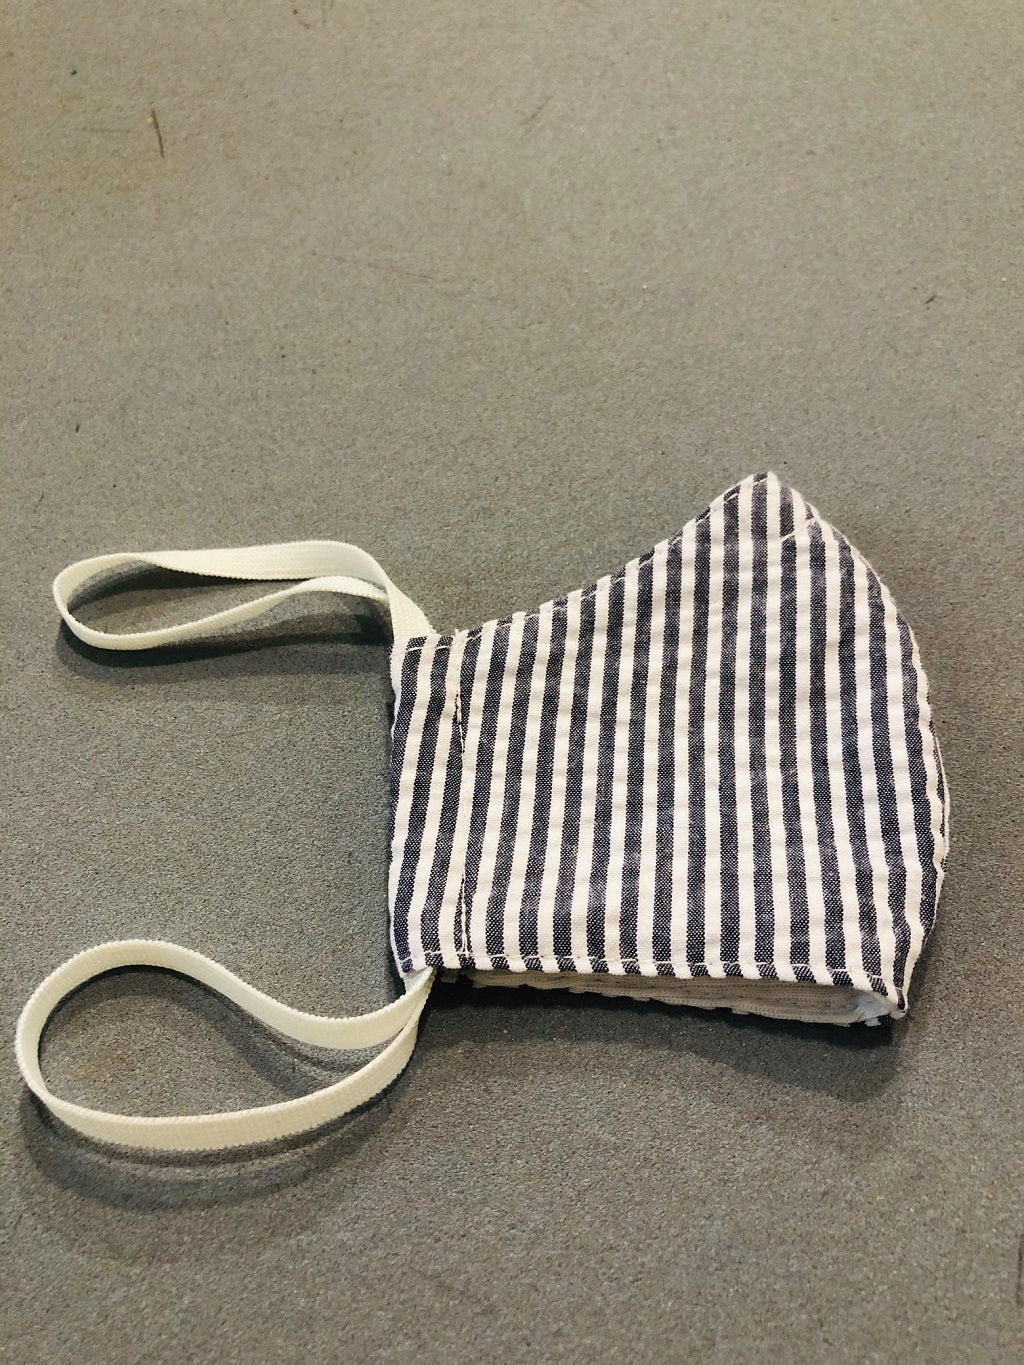 Children's Curved Fitted Cloth Mask - More Options Available